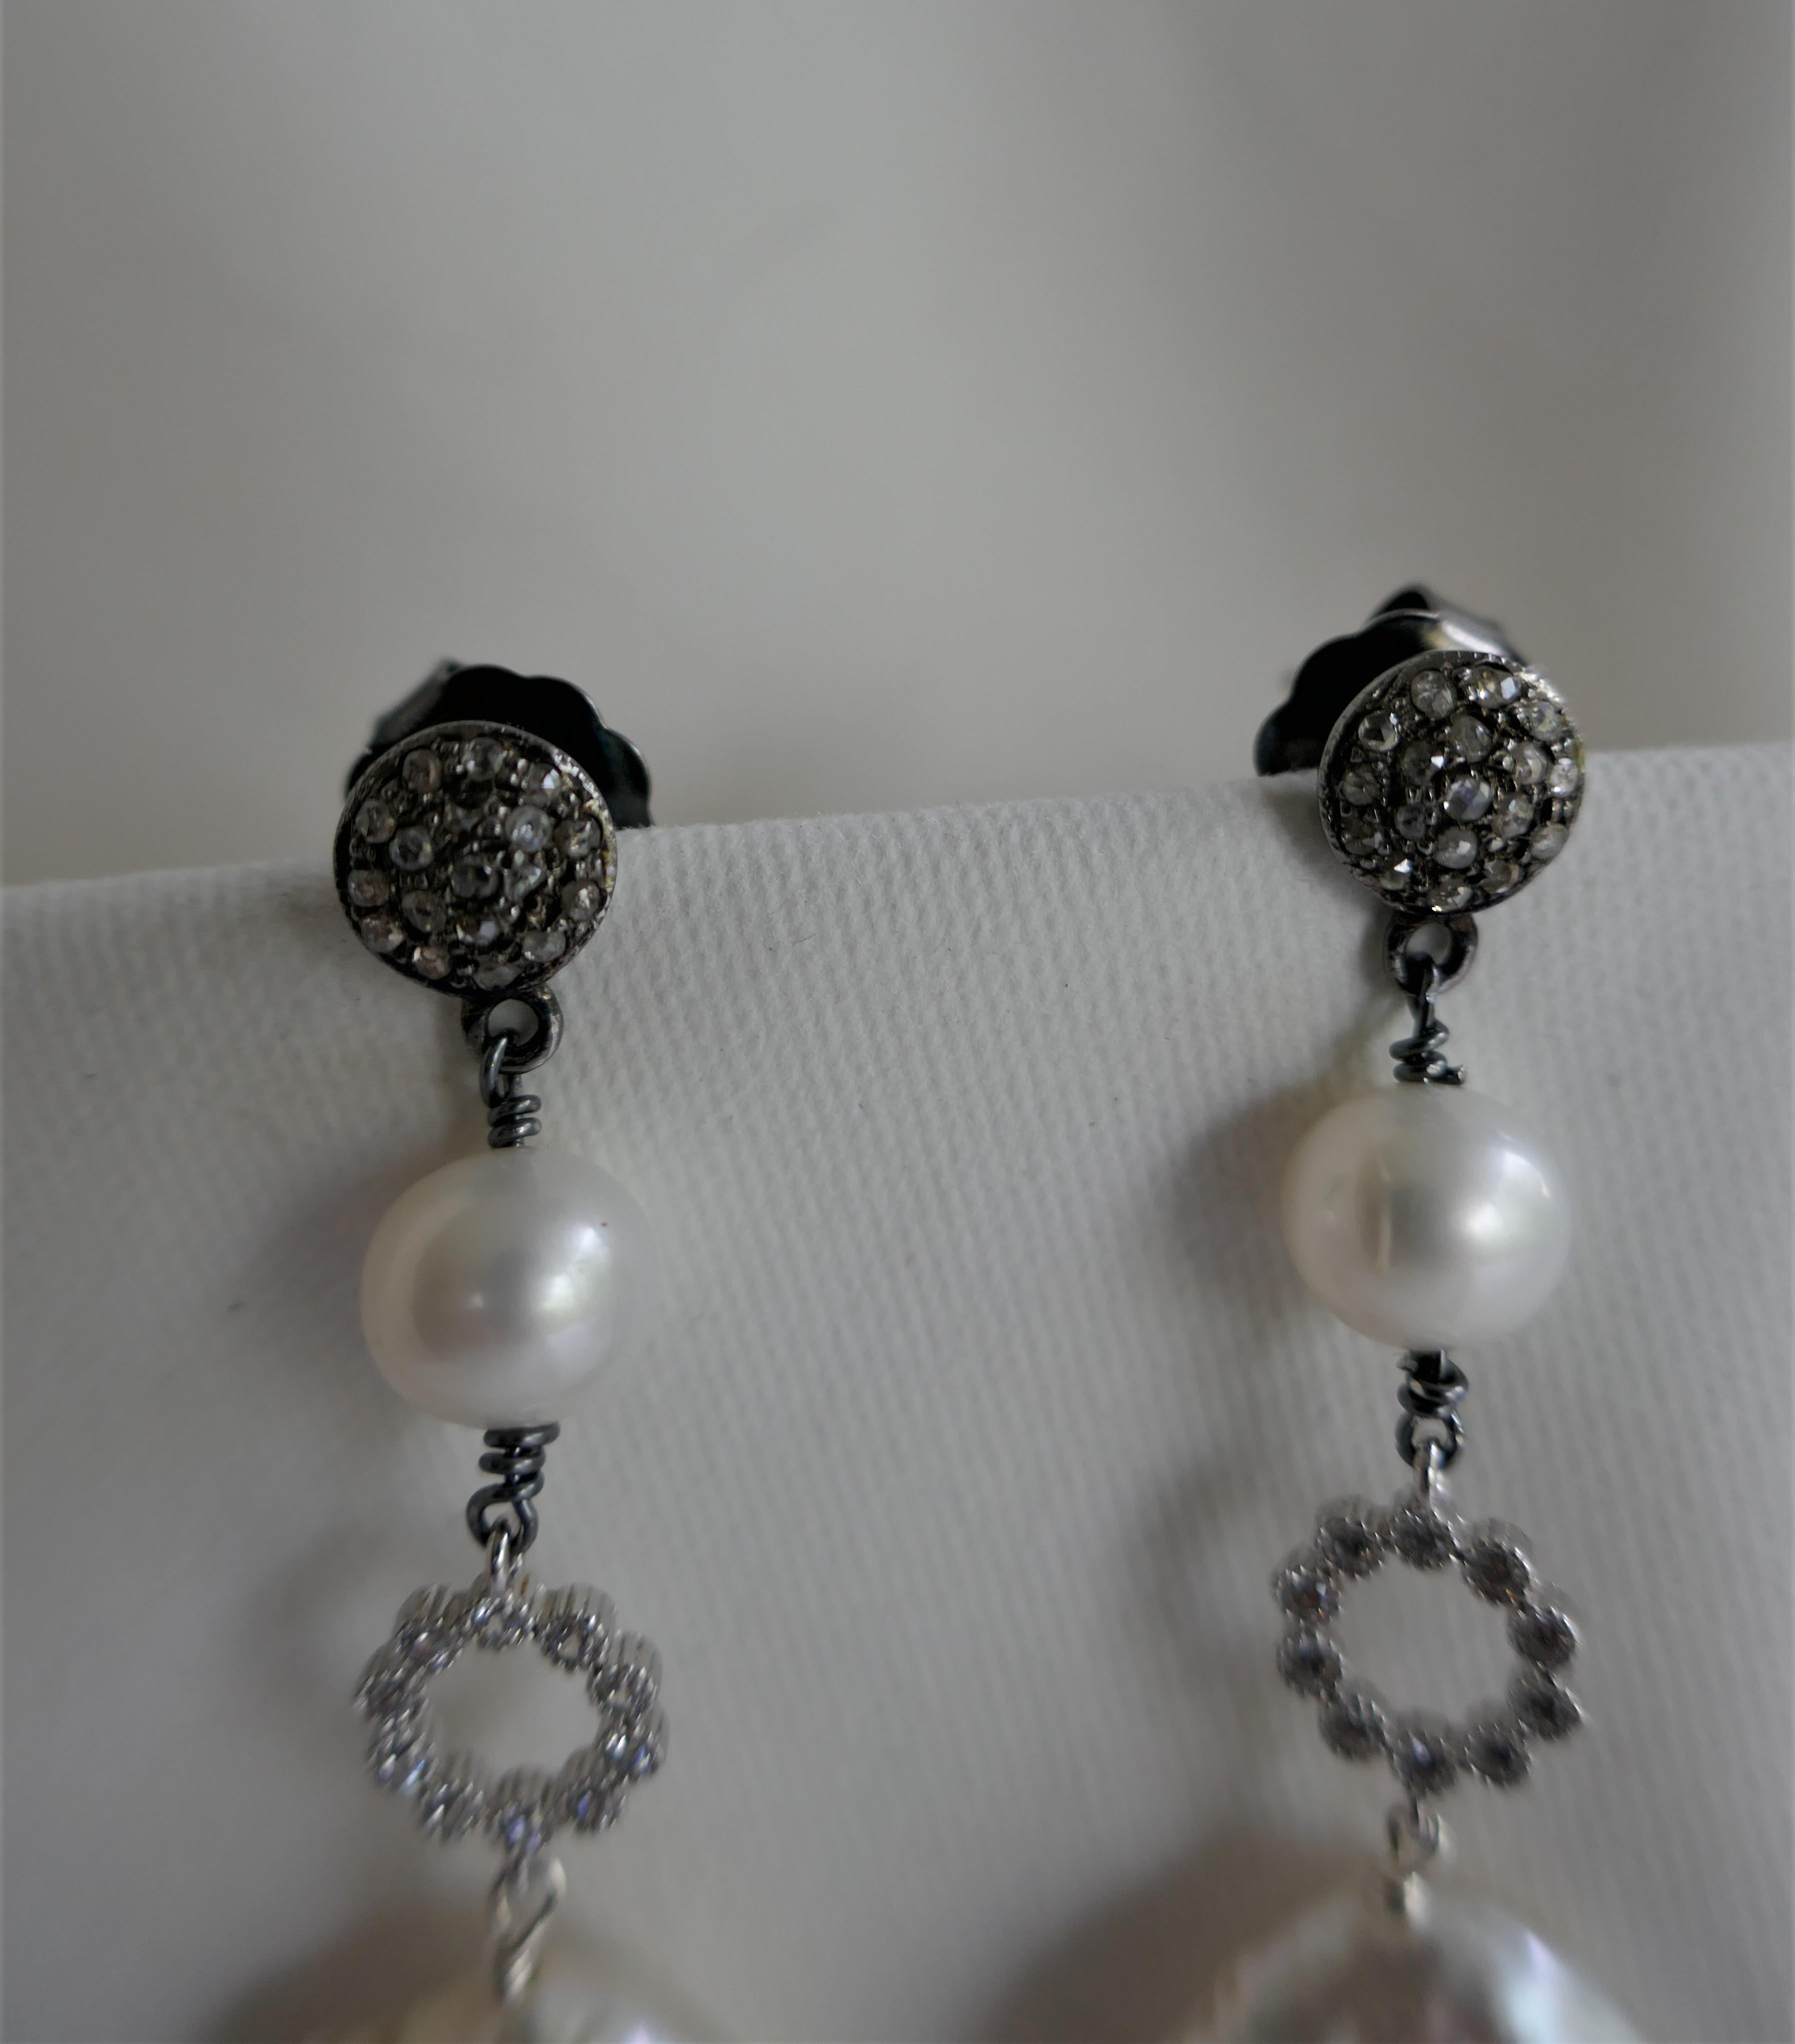 Great earrings. The earrings 13mm white coin cultured pearls that hand 925 sterling silver cubic zirconia bead and 7.5mm almost round white cultured pearls. The post is 925 oxidized silver and diamonds 8mm push back. These earrings can be dressed up